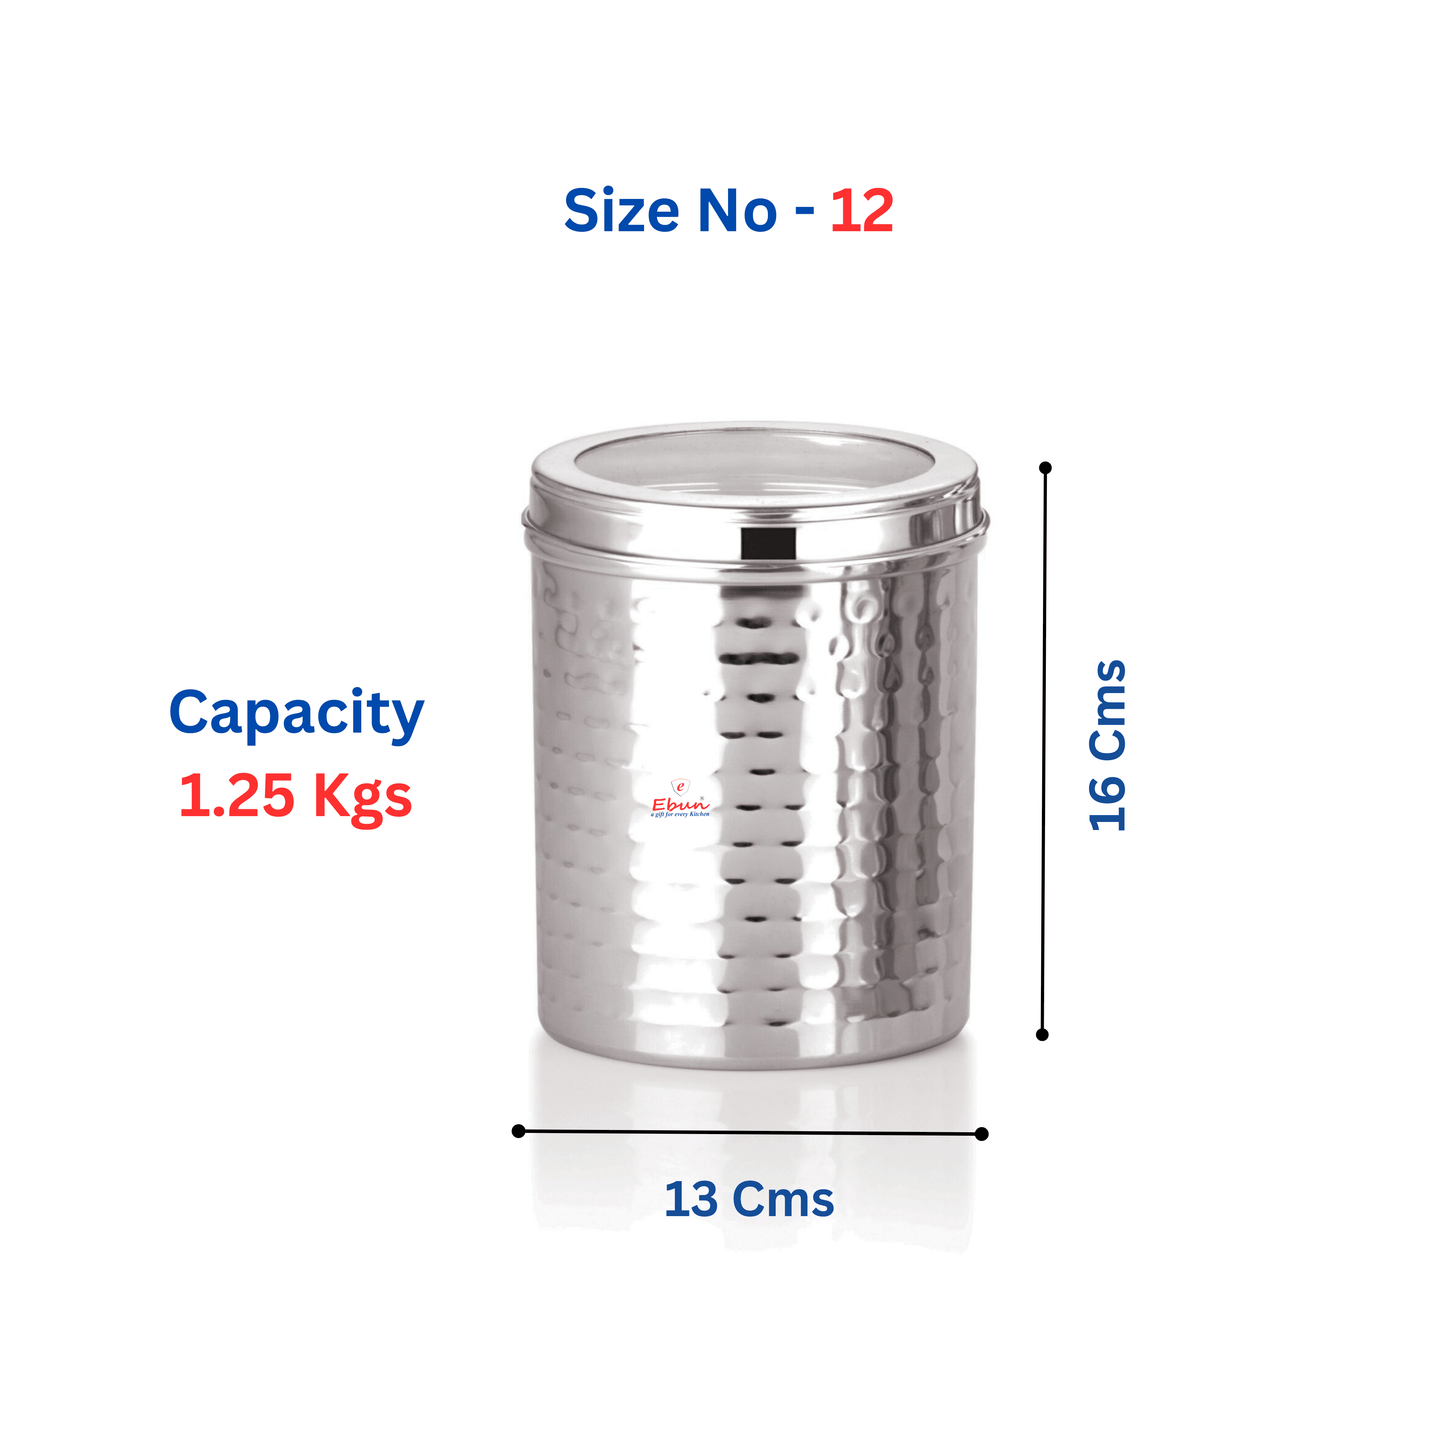 steel small containers with lid | air tight steel container | steel container 5kg | 5kg steel container for kitchen storage | food storage containers steel | steel air tight containers for storage | steel container for kitchen | container steel | air tight steel containers for storage